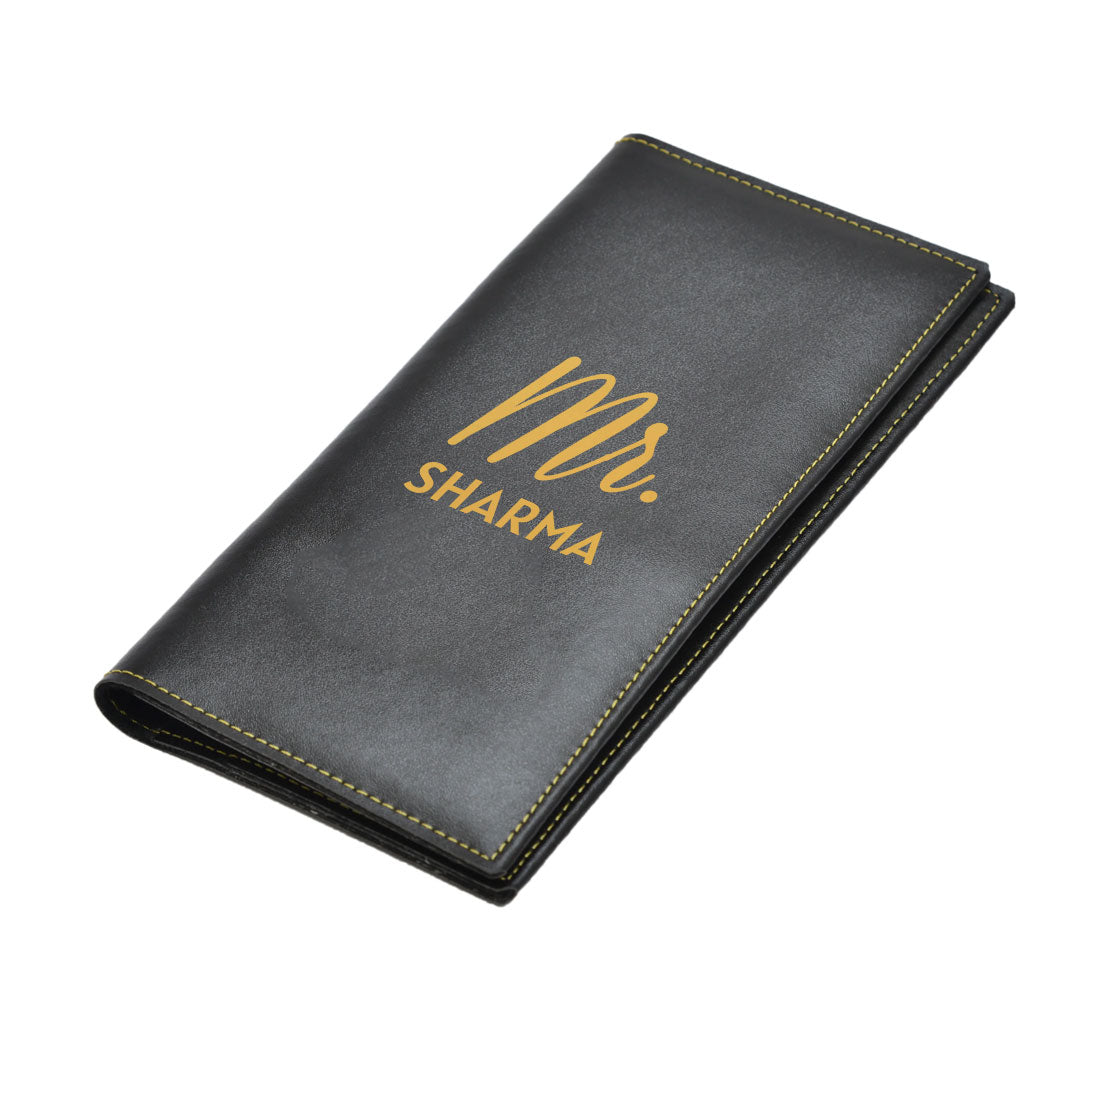 Personalised Travel Document Wallet Passport Cover for Couple MR - Anniversary Gift